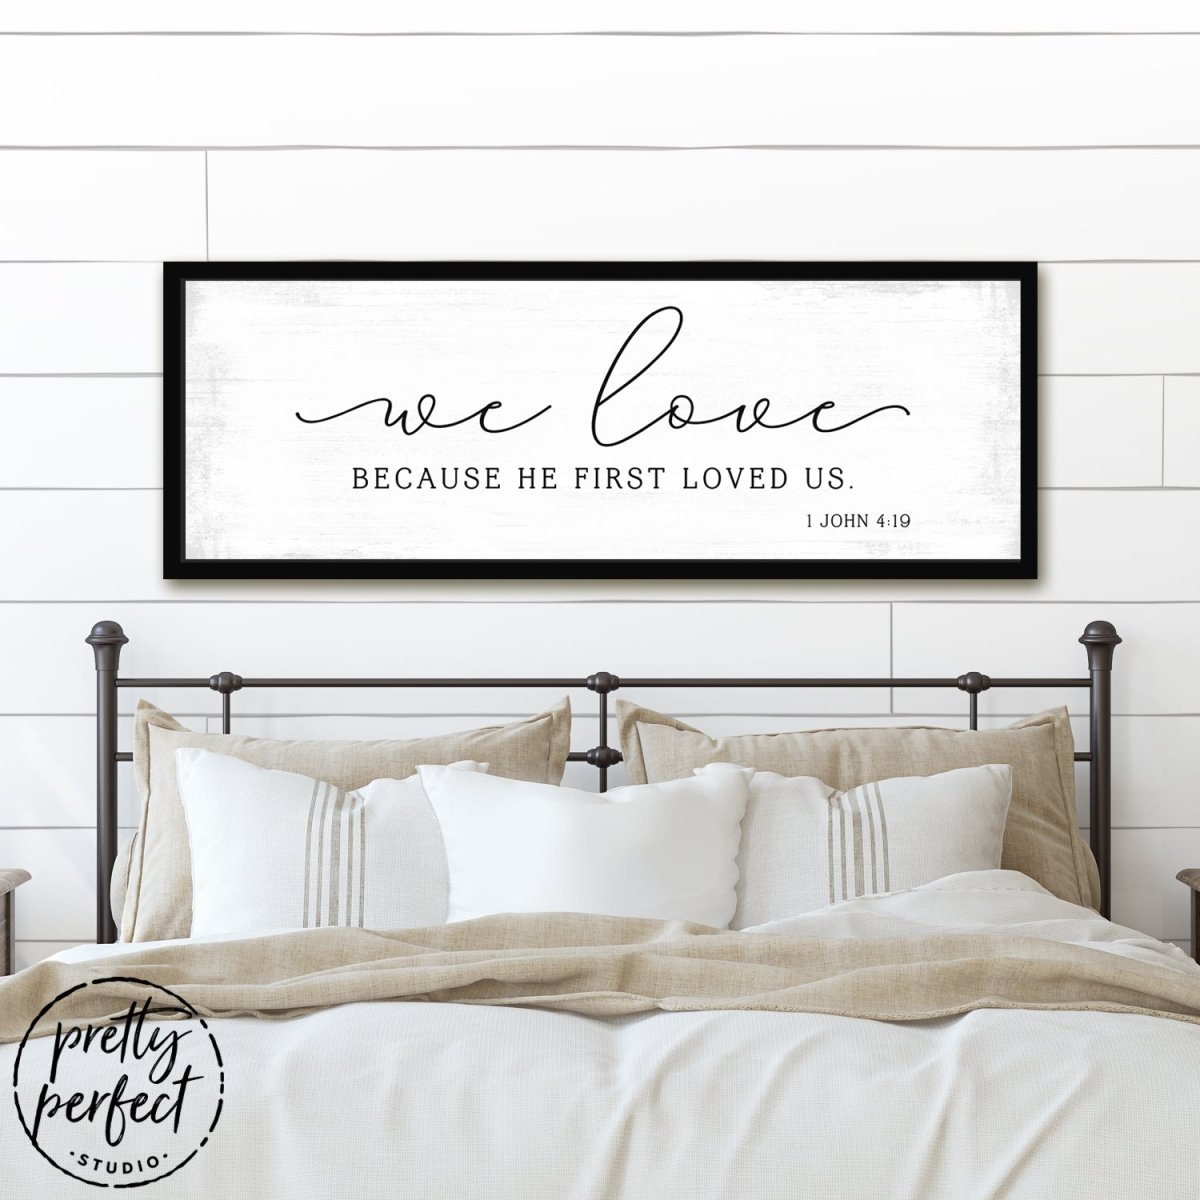 We Love Because He First Loved Us Christian Sign Hanging on Wall - Pretty Perfect Studio